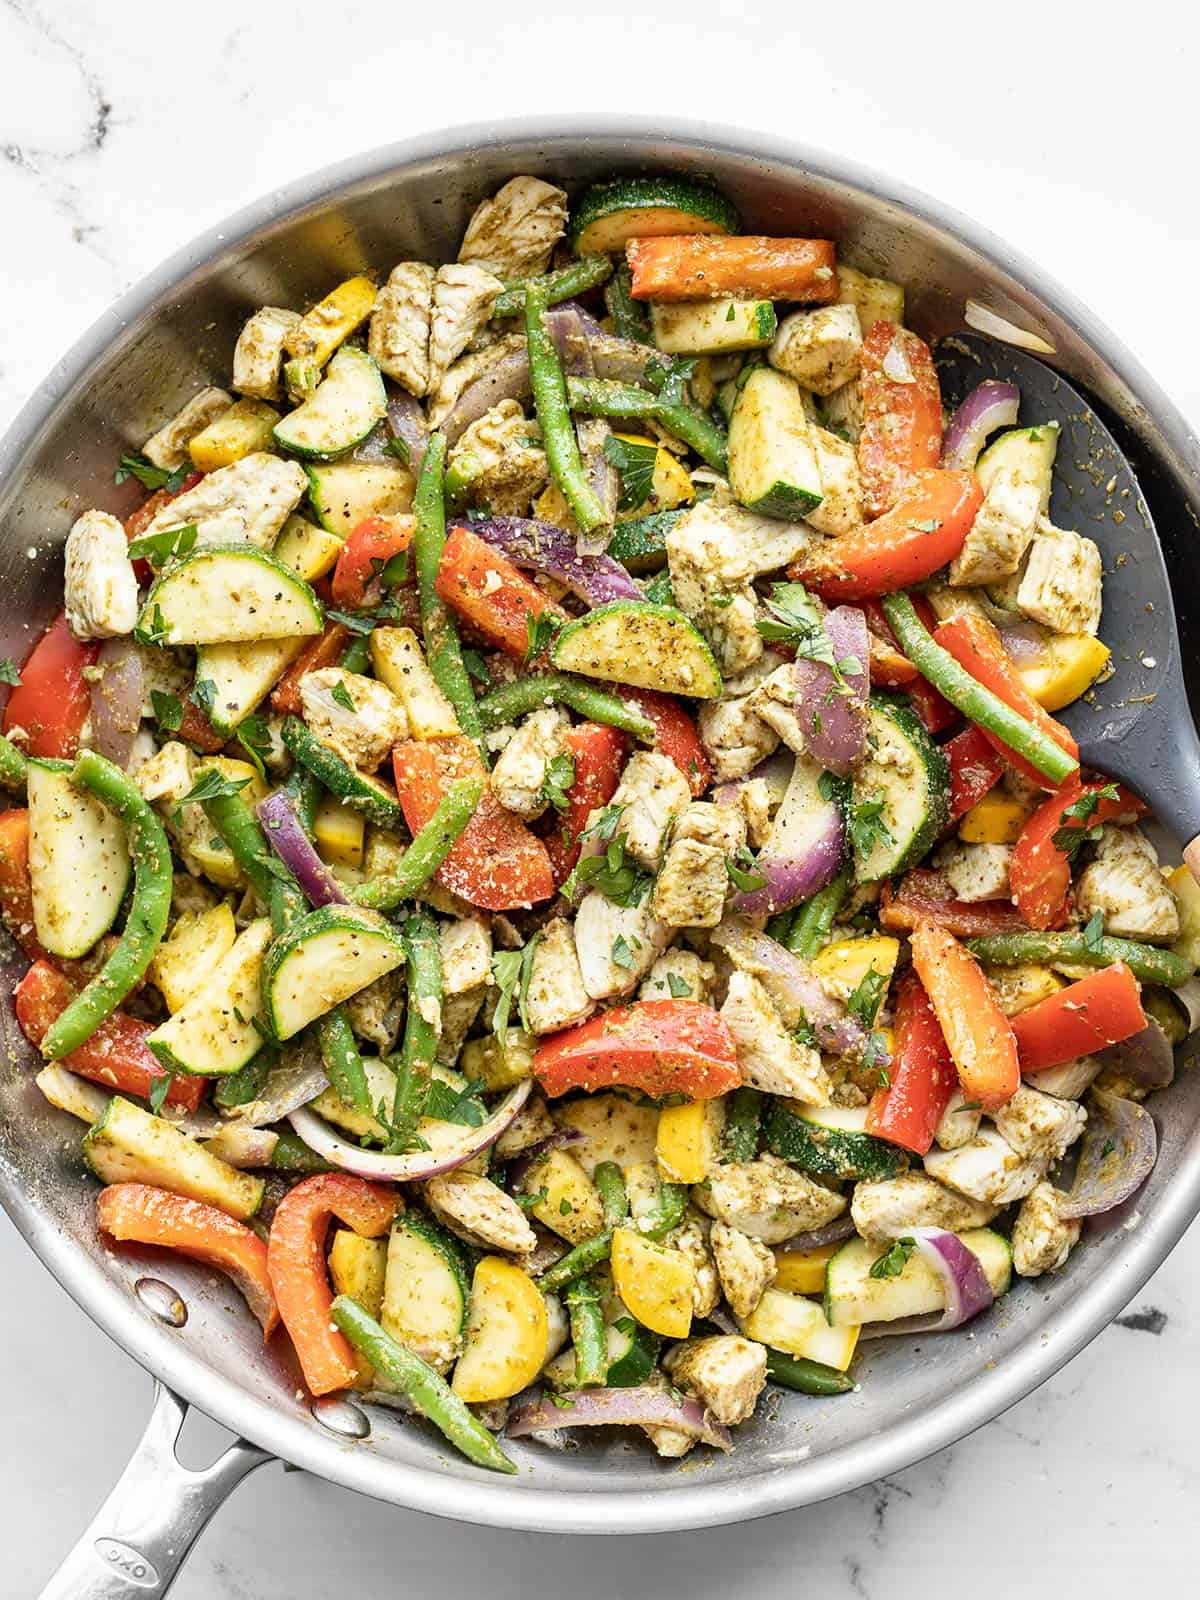 Pesto chicken and vegetables in a skillet